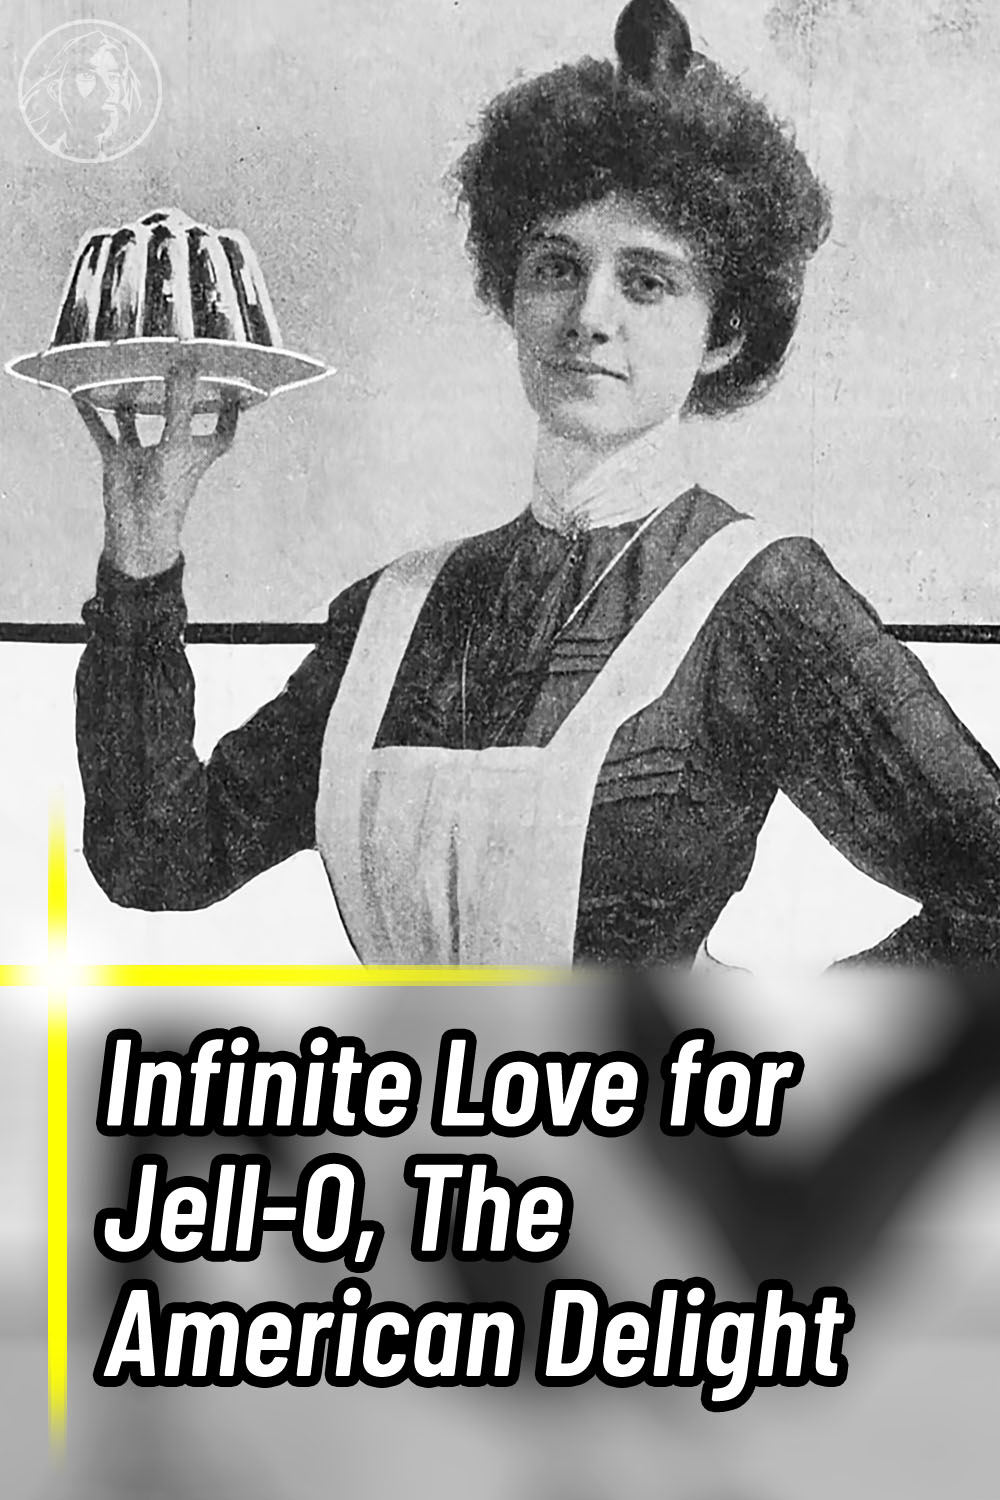 Infinite Love for Jell-O, The American Delight